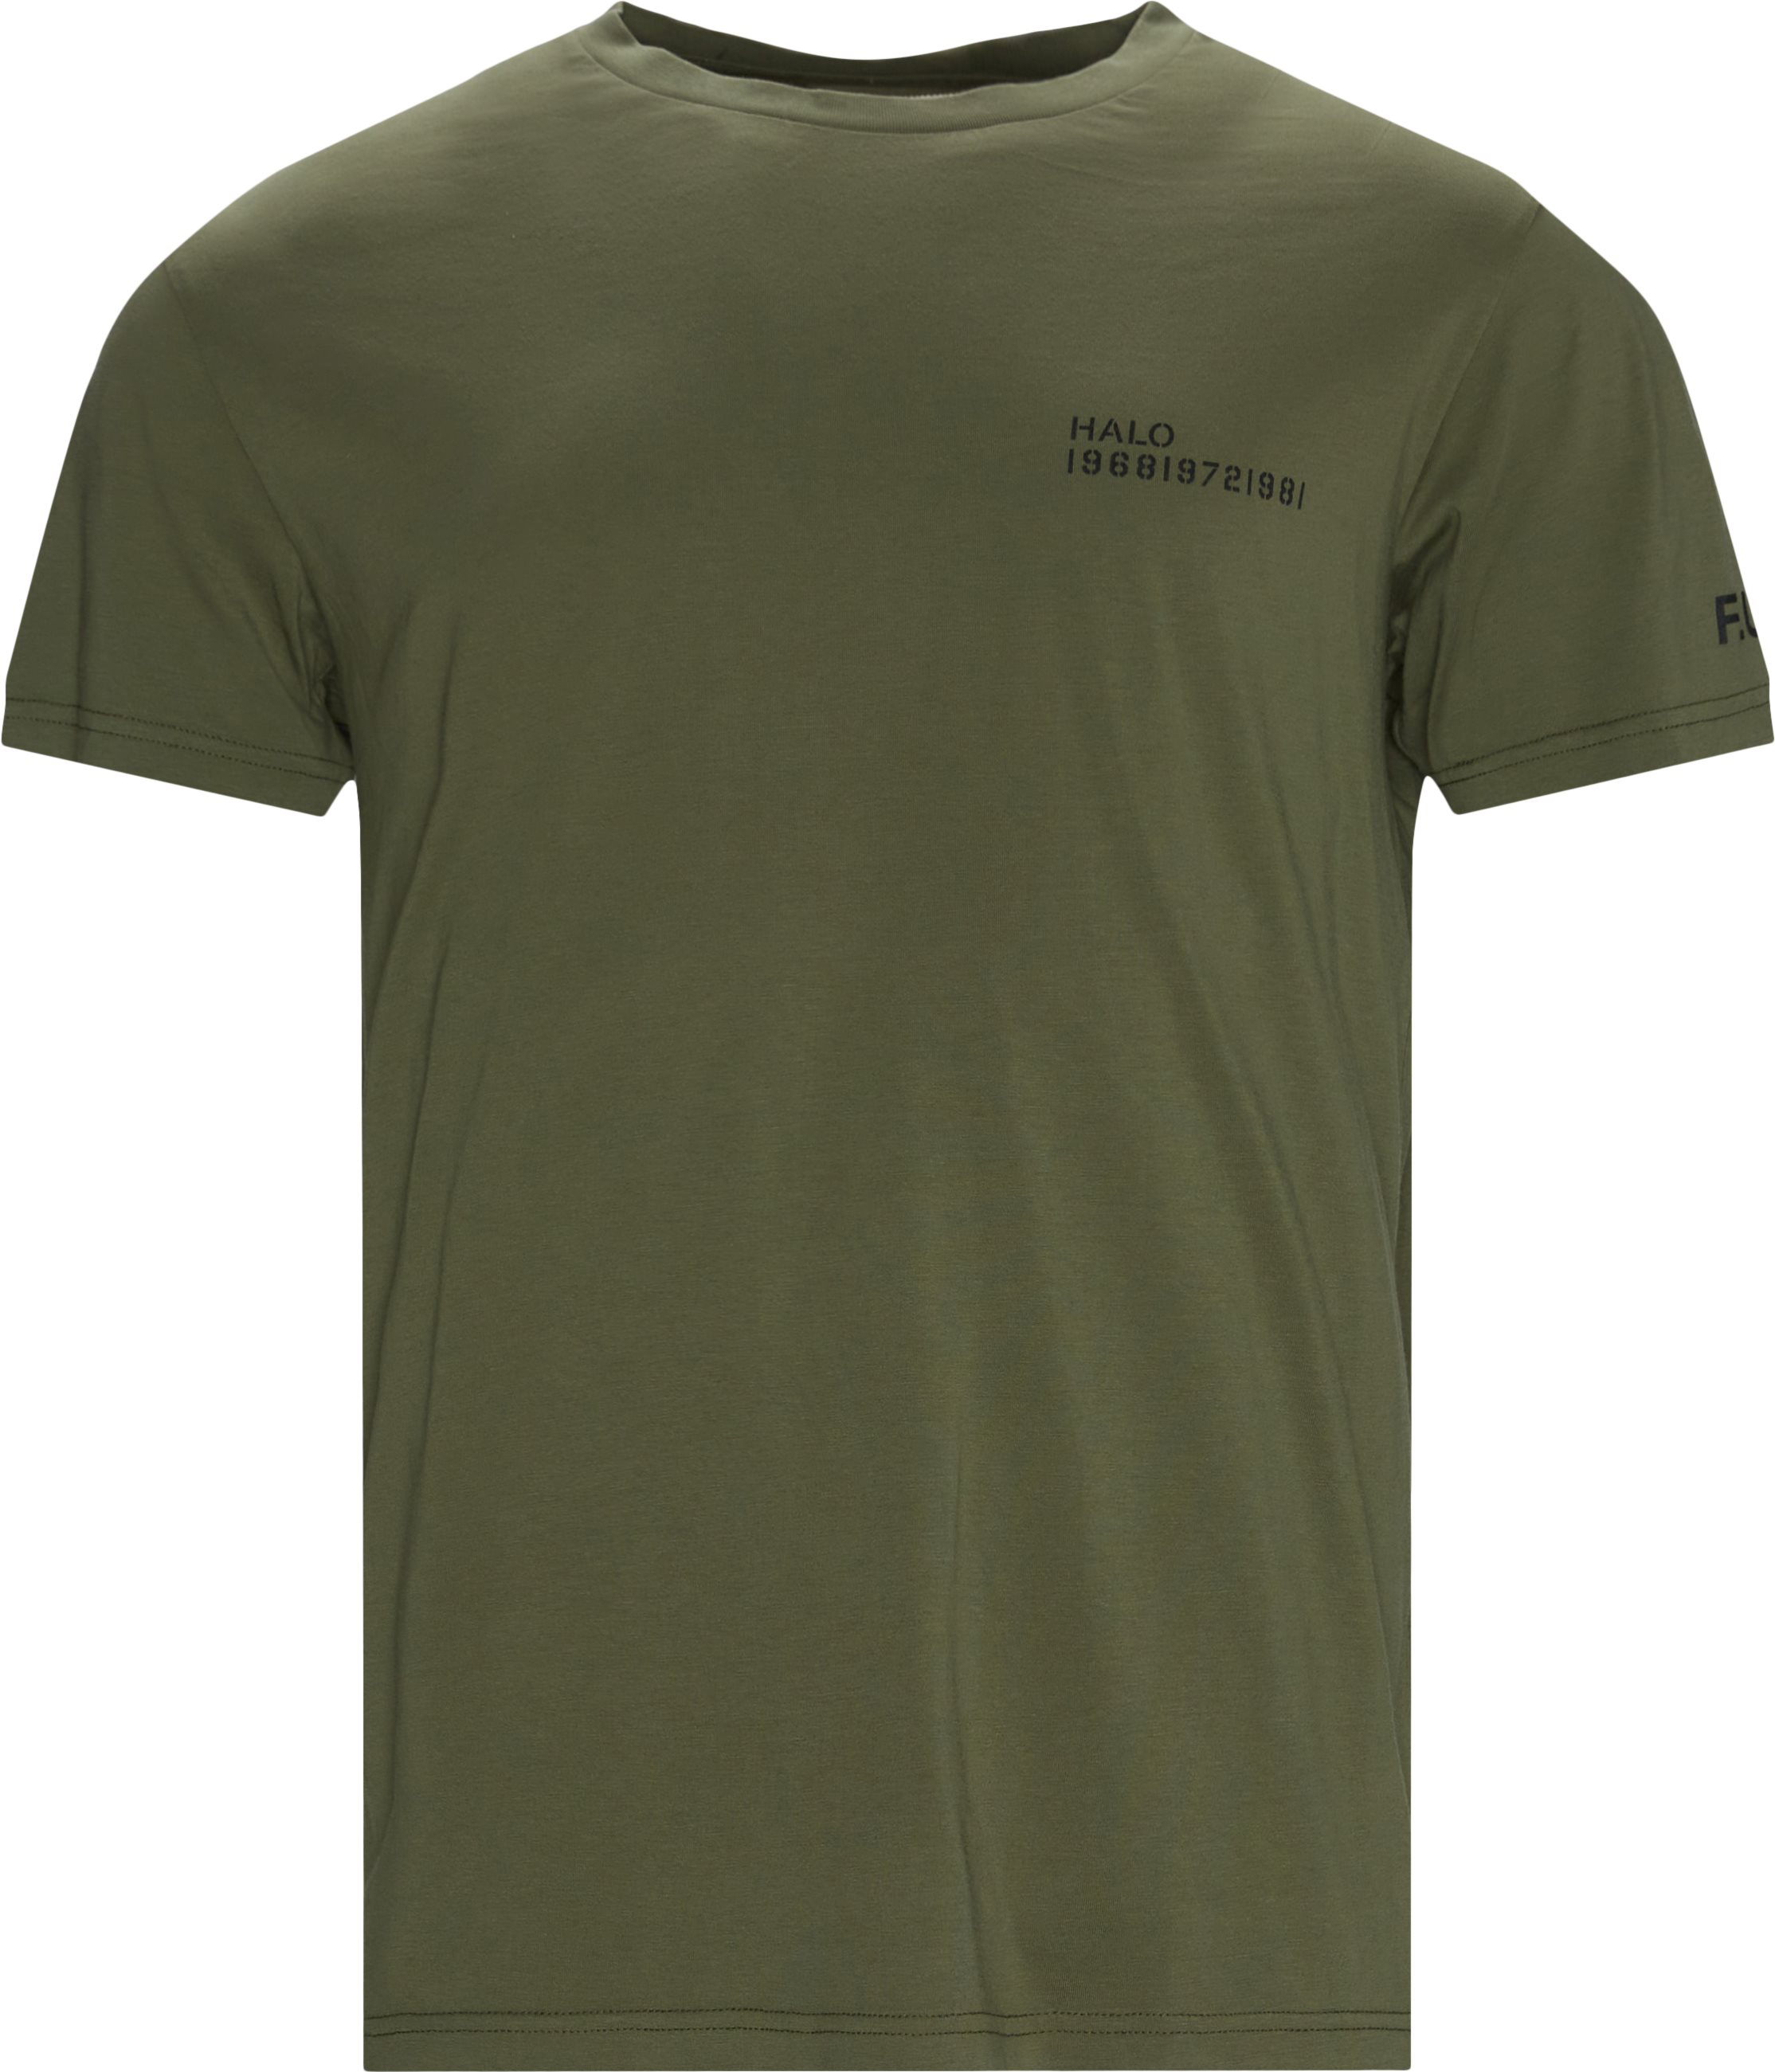 Cotton Tee  - T-shirts - Regular fit - Army